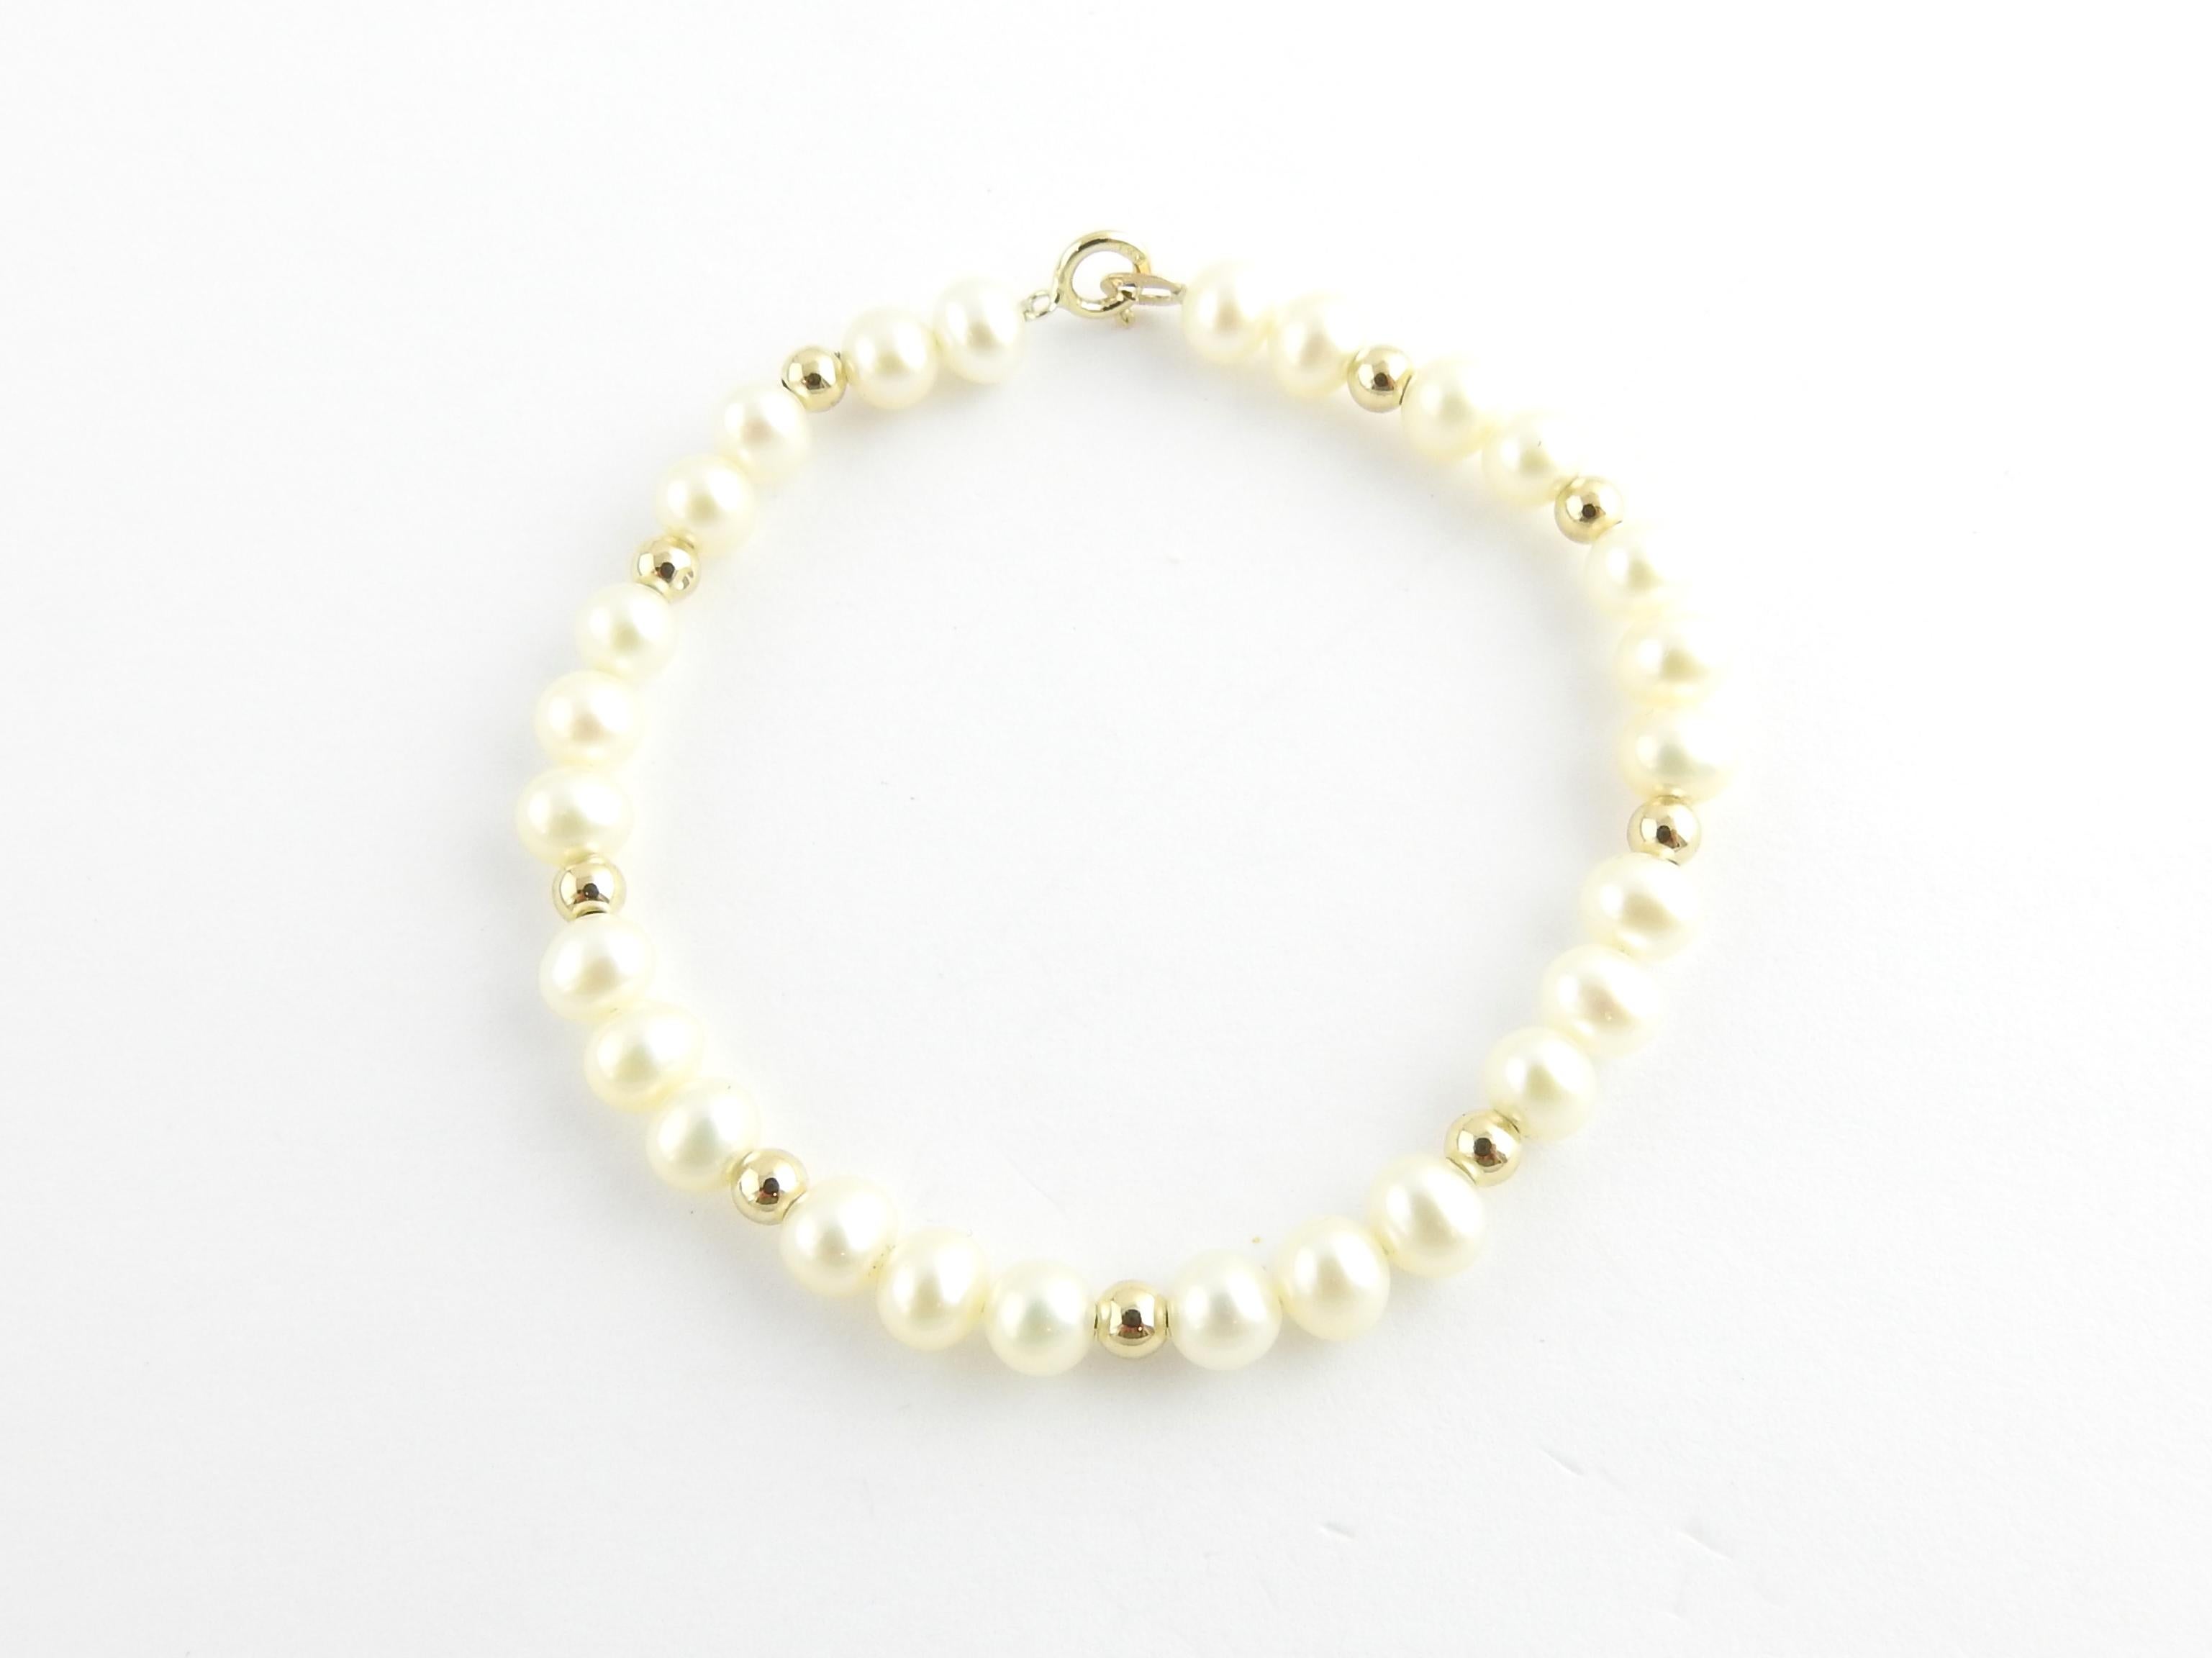 Vintage 14 Karat Yellow Gold and Pearl Bracelet

This lovely bracelet features 26 round pearls (5 mm each) and nine delicate 14K gold beads. Spring ring closure.

Size: 5.25 inches

Weight: 2.4 dwt. / 3.8 gr.

Stamped: 14K

Very good condition,